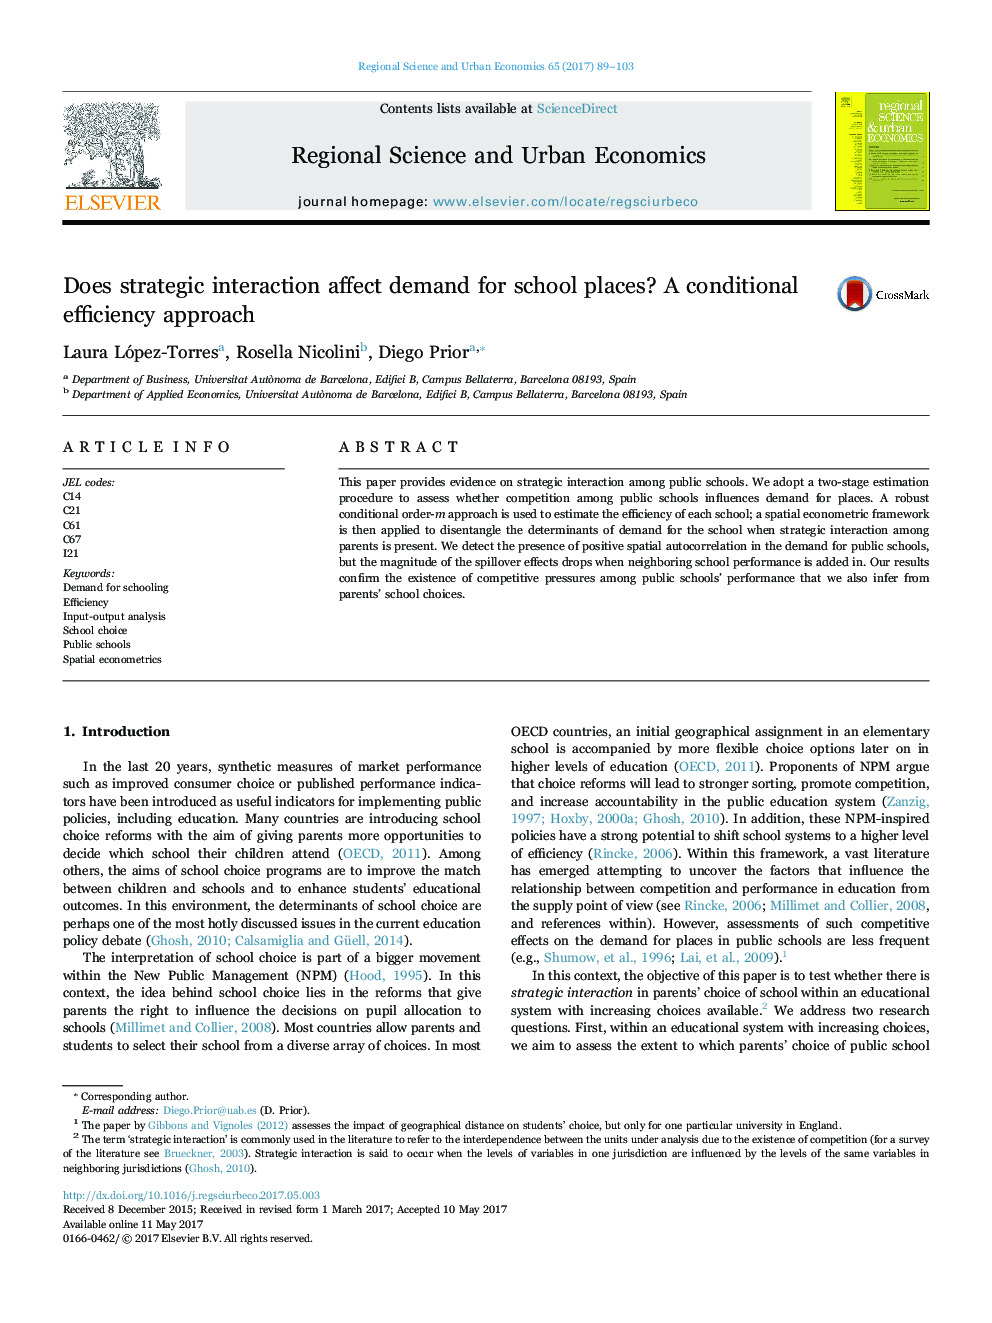 Does strategic interaction affect demand for school places? A conditional efficiency approach